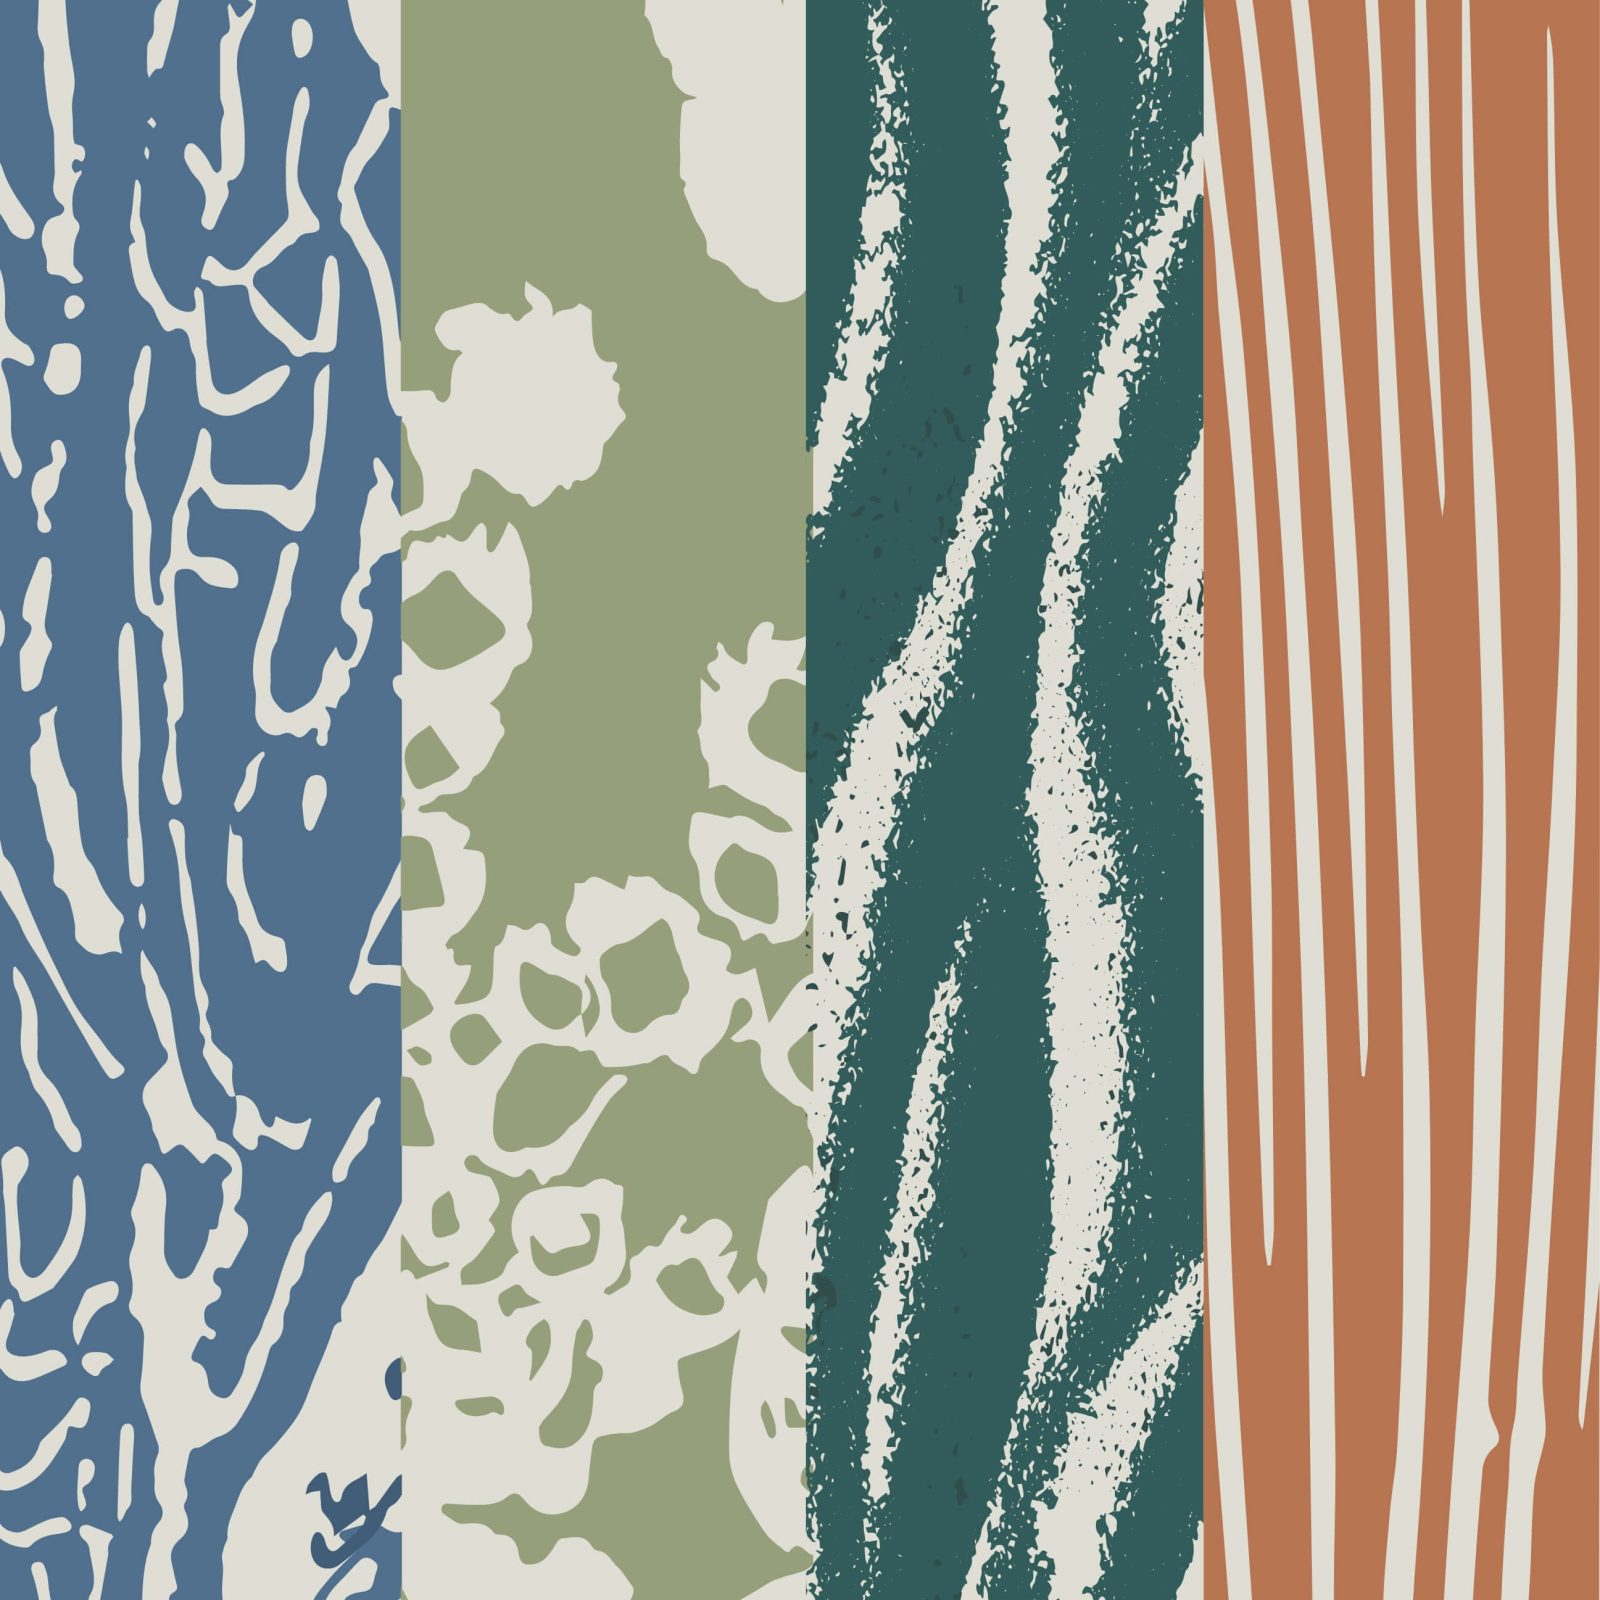 Four vertical panels display abstract designs in blue, green, teal, and orange, with textures resembling tree bark, plant shapes, water ripples, and striped fabric.